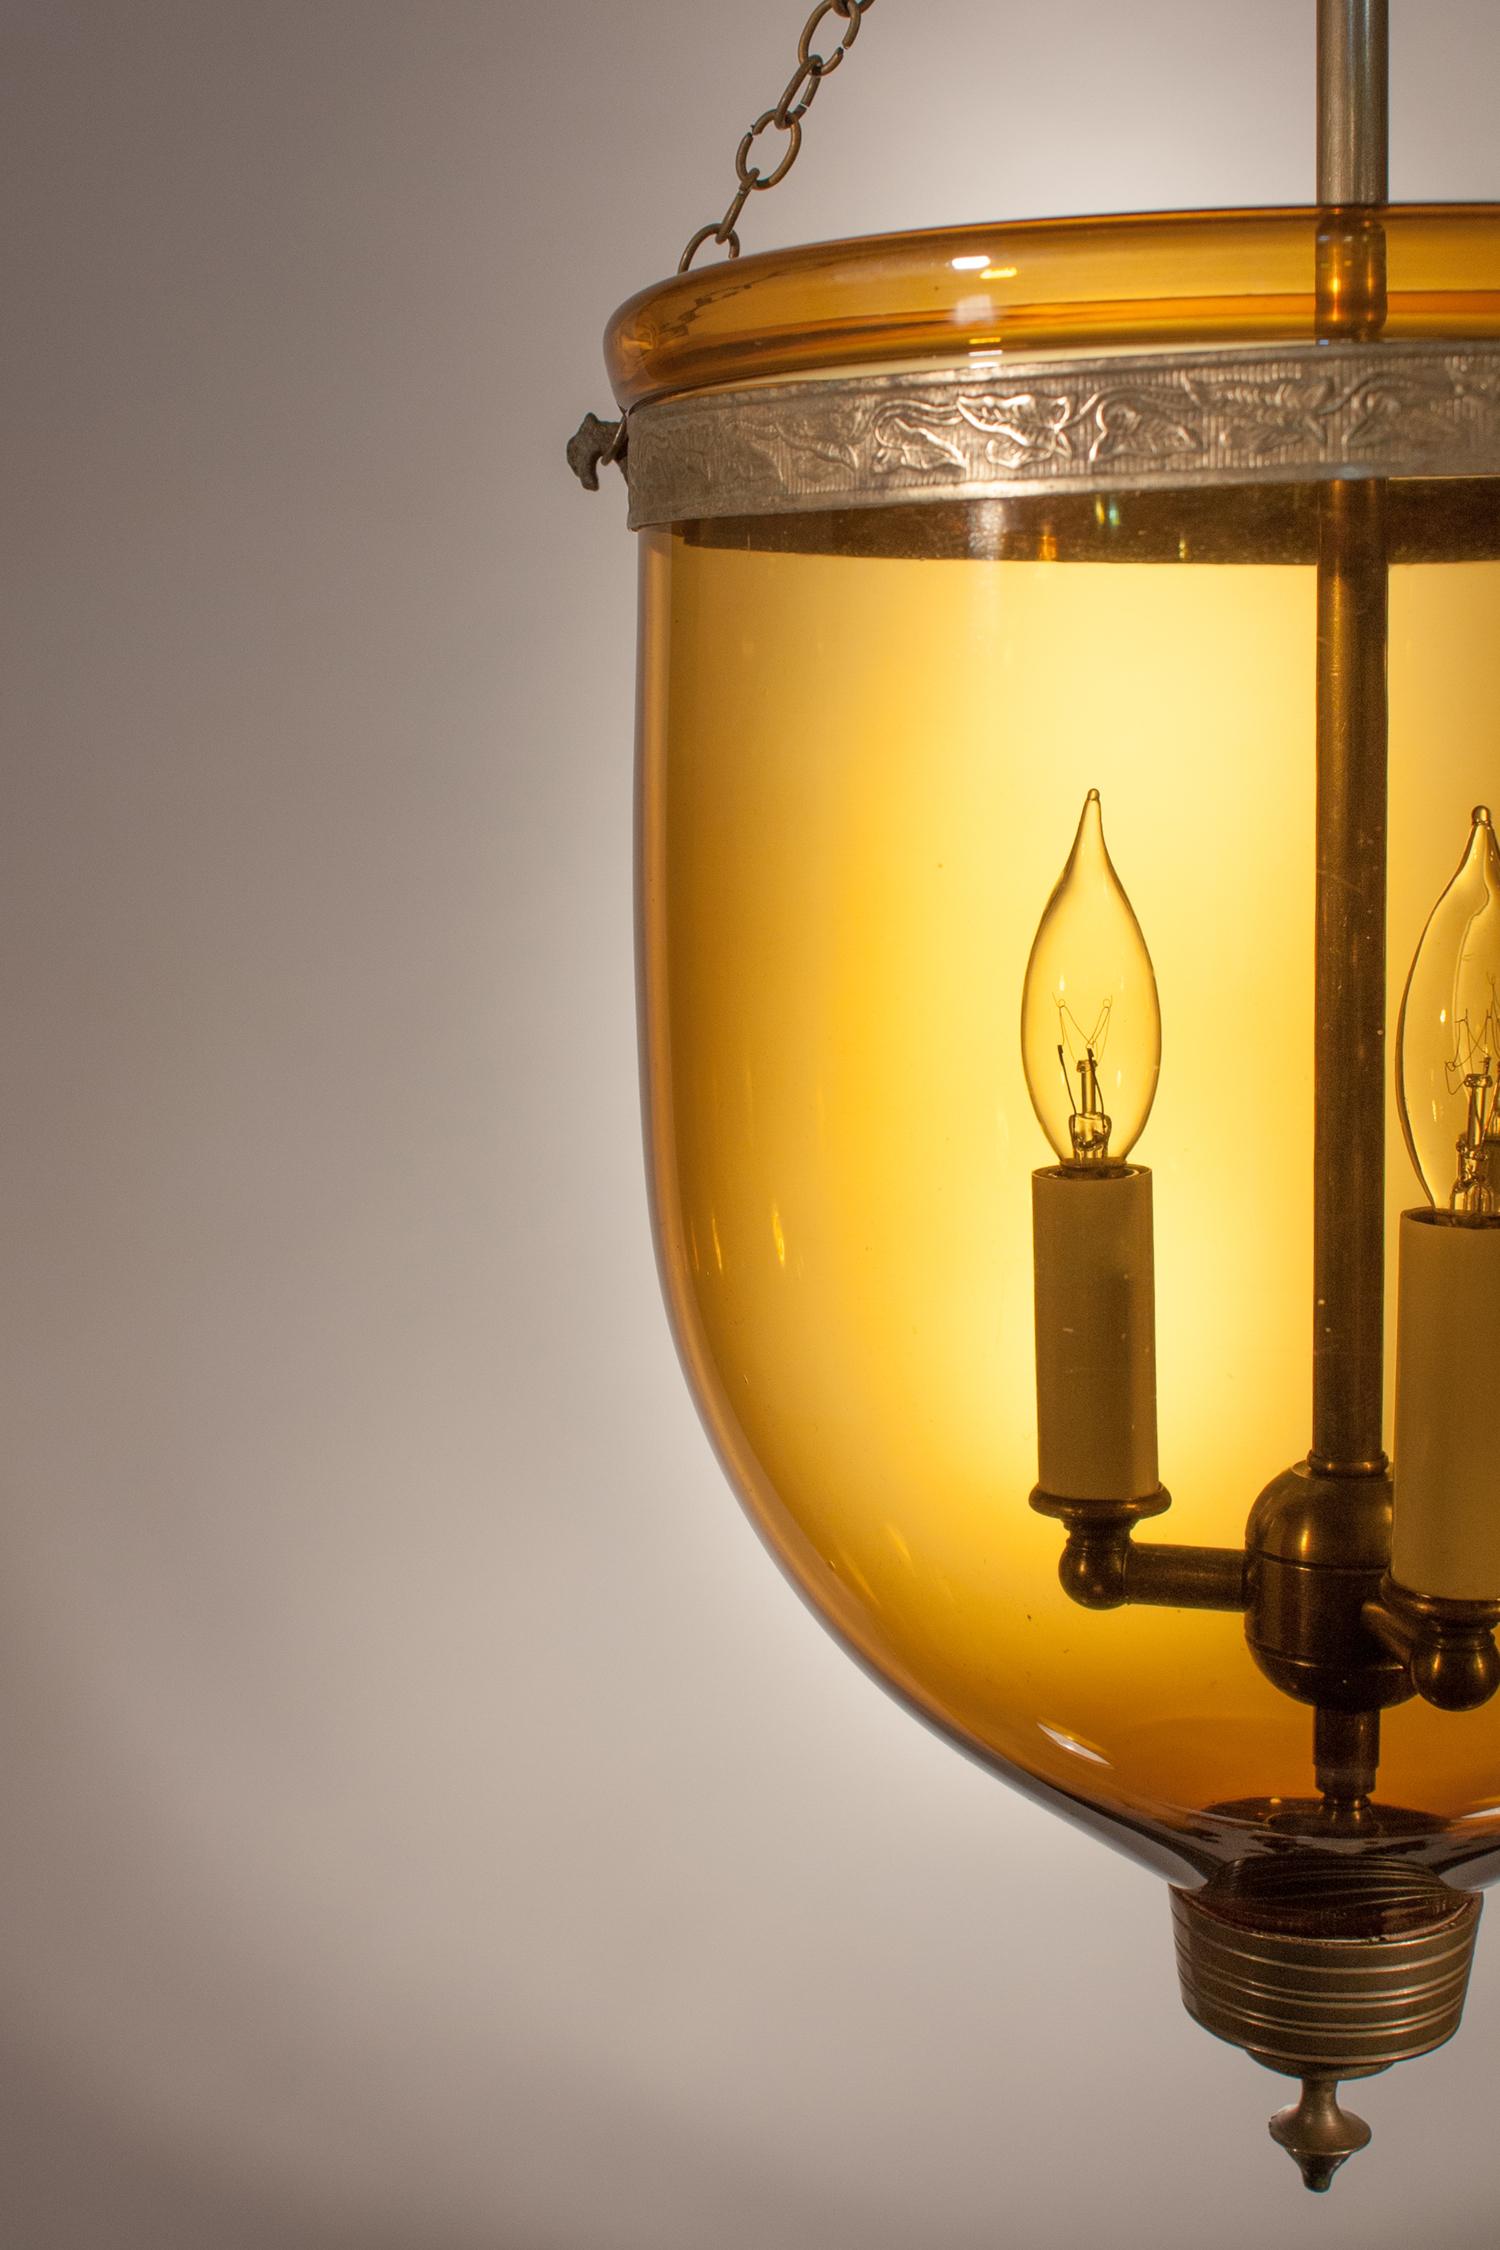 19th Century Antique Bell Jar Lantern with Amber Colored Glass